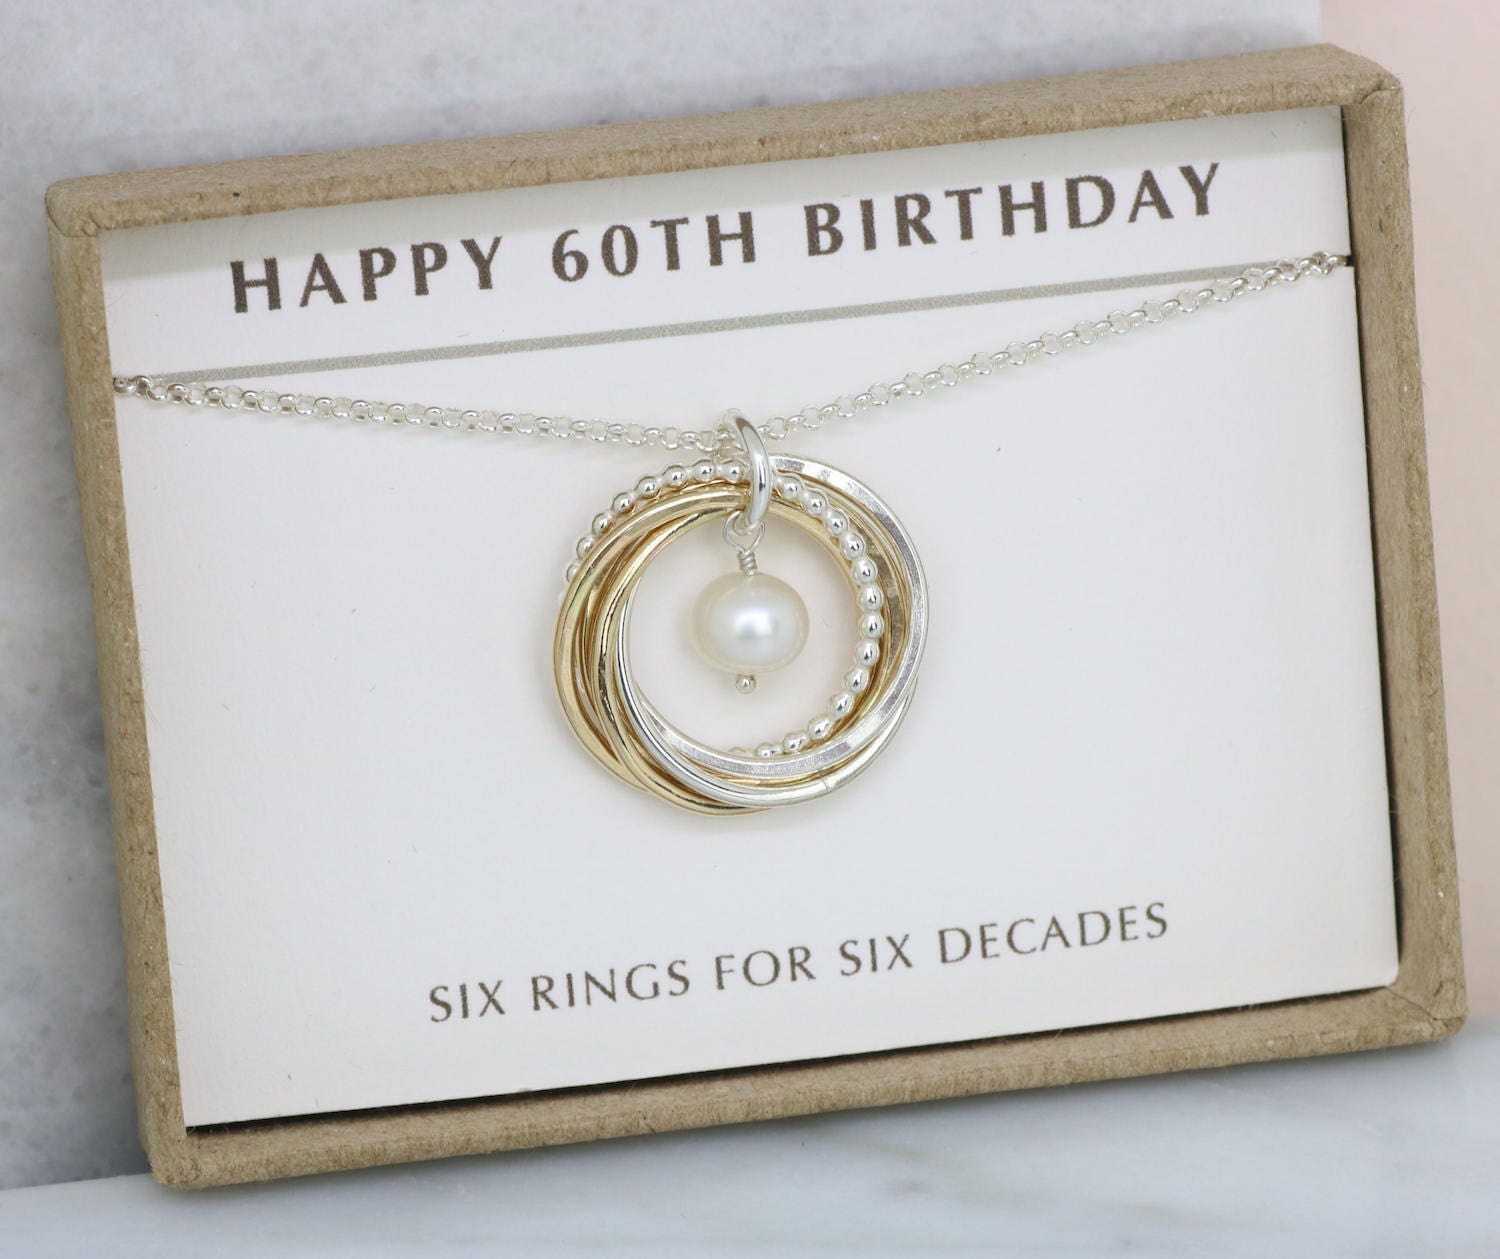 60th birthday gift pearl necklace 6 year anniversary gift